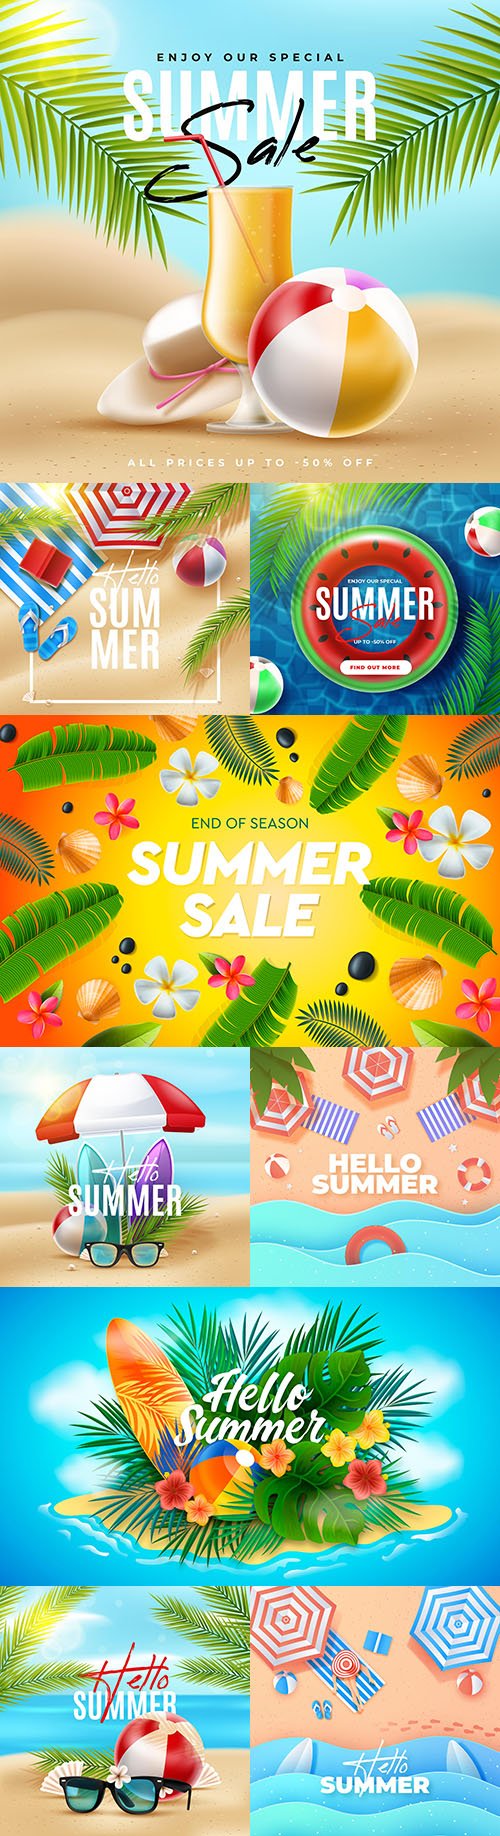 Hello summer sale design with tropical leaves 2